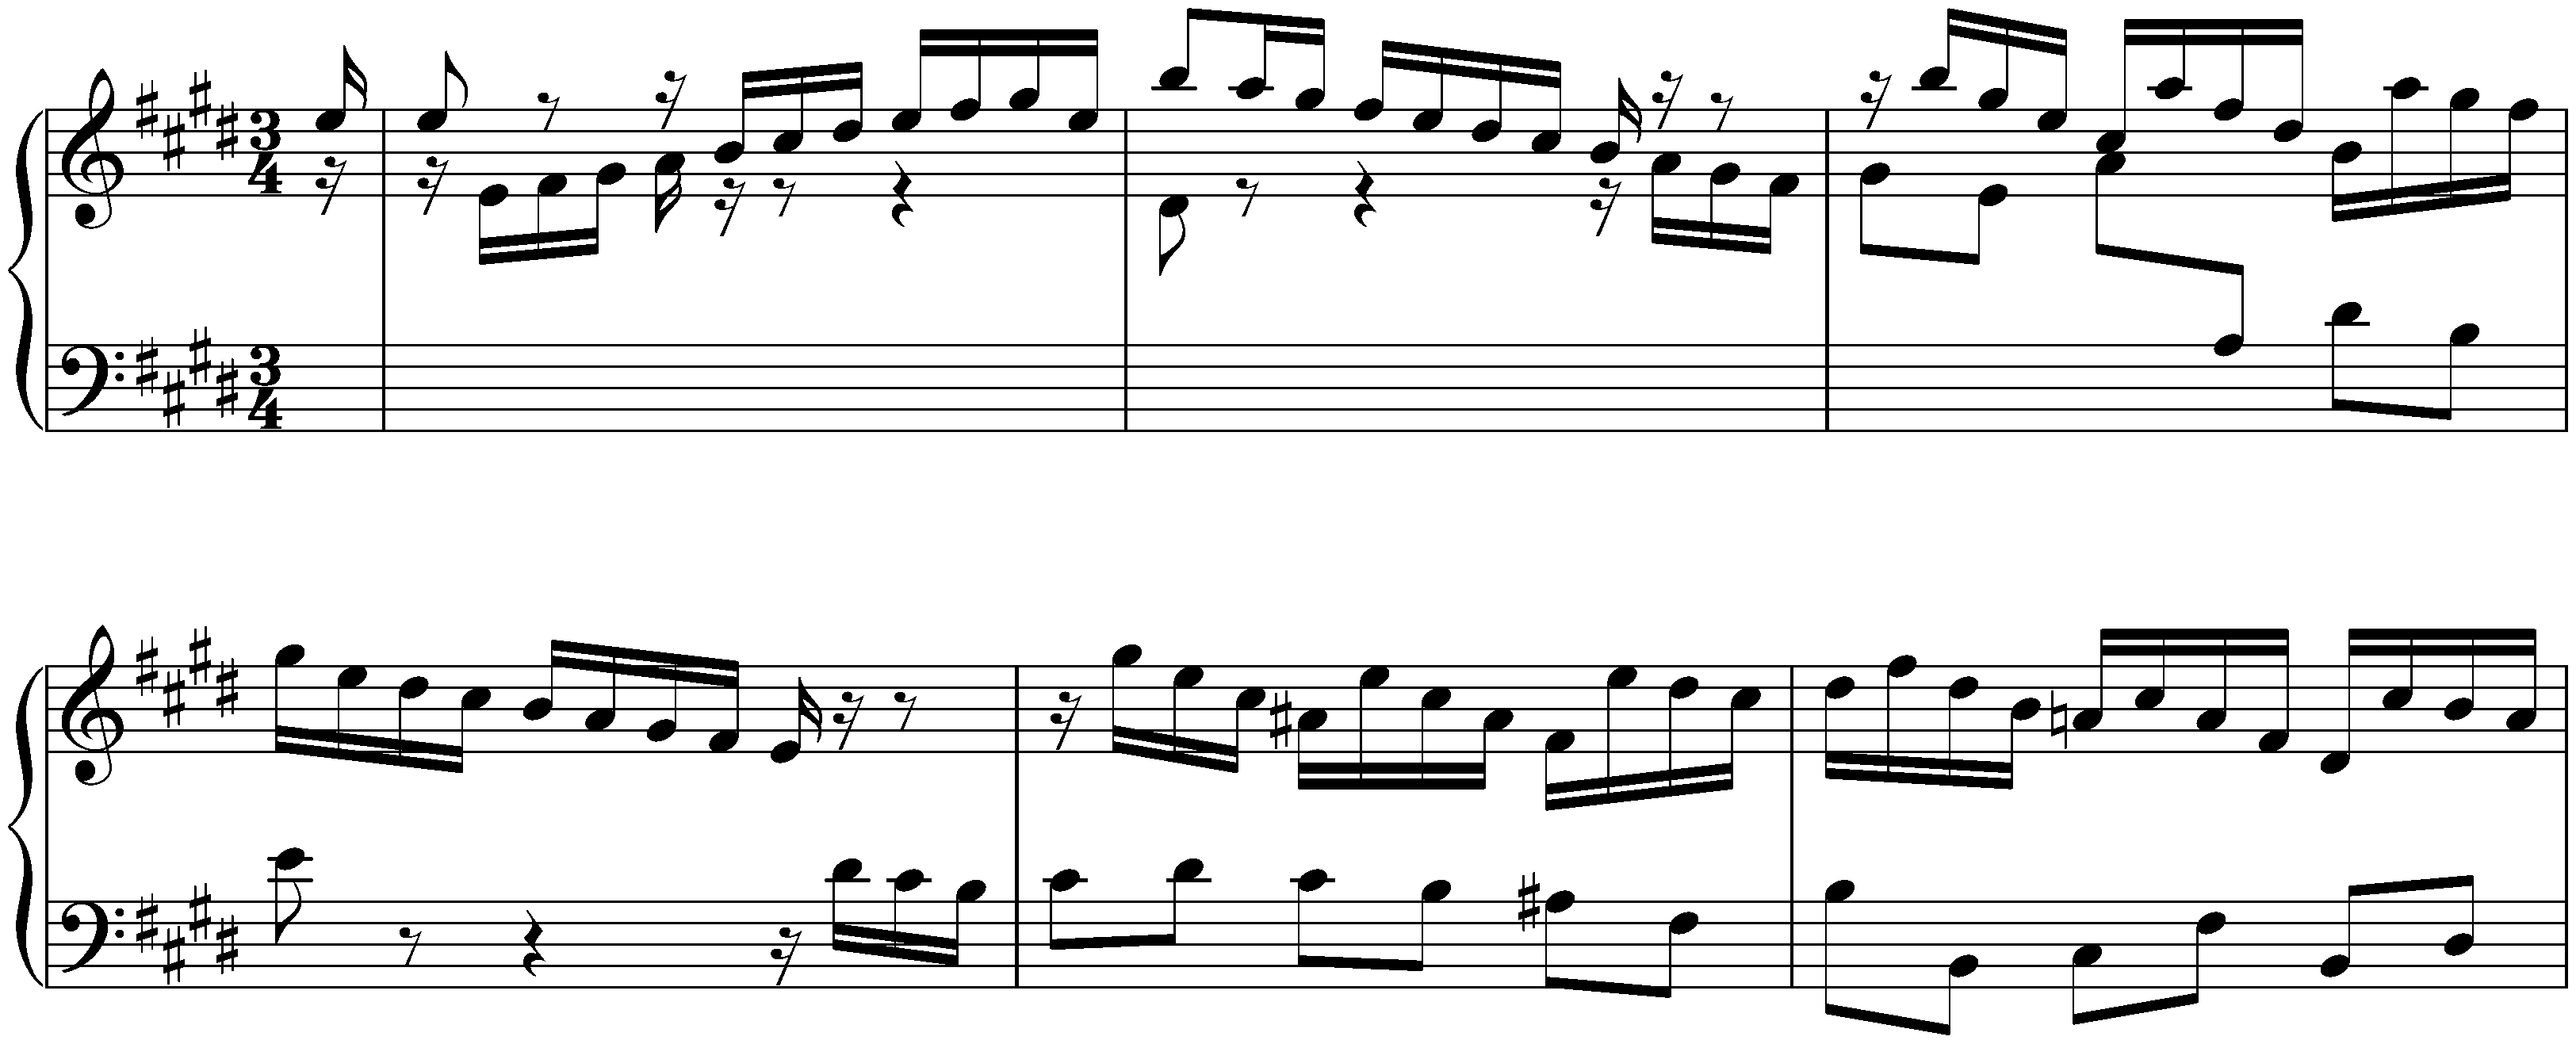 French Suite no. 6 in E major, BWV 817; 2. Courante